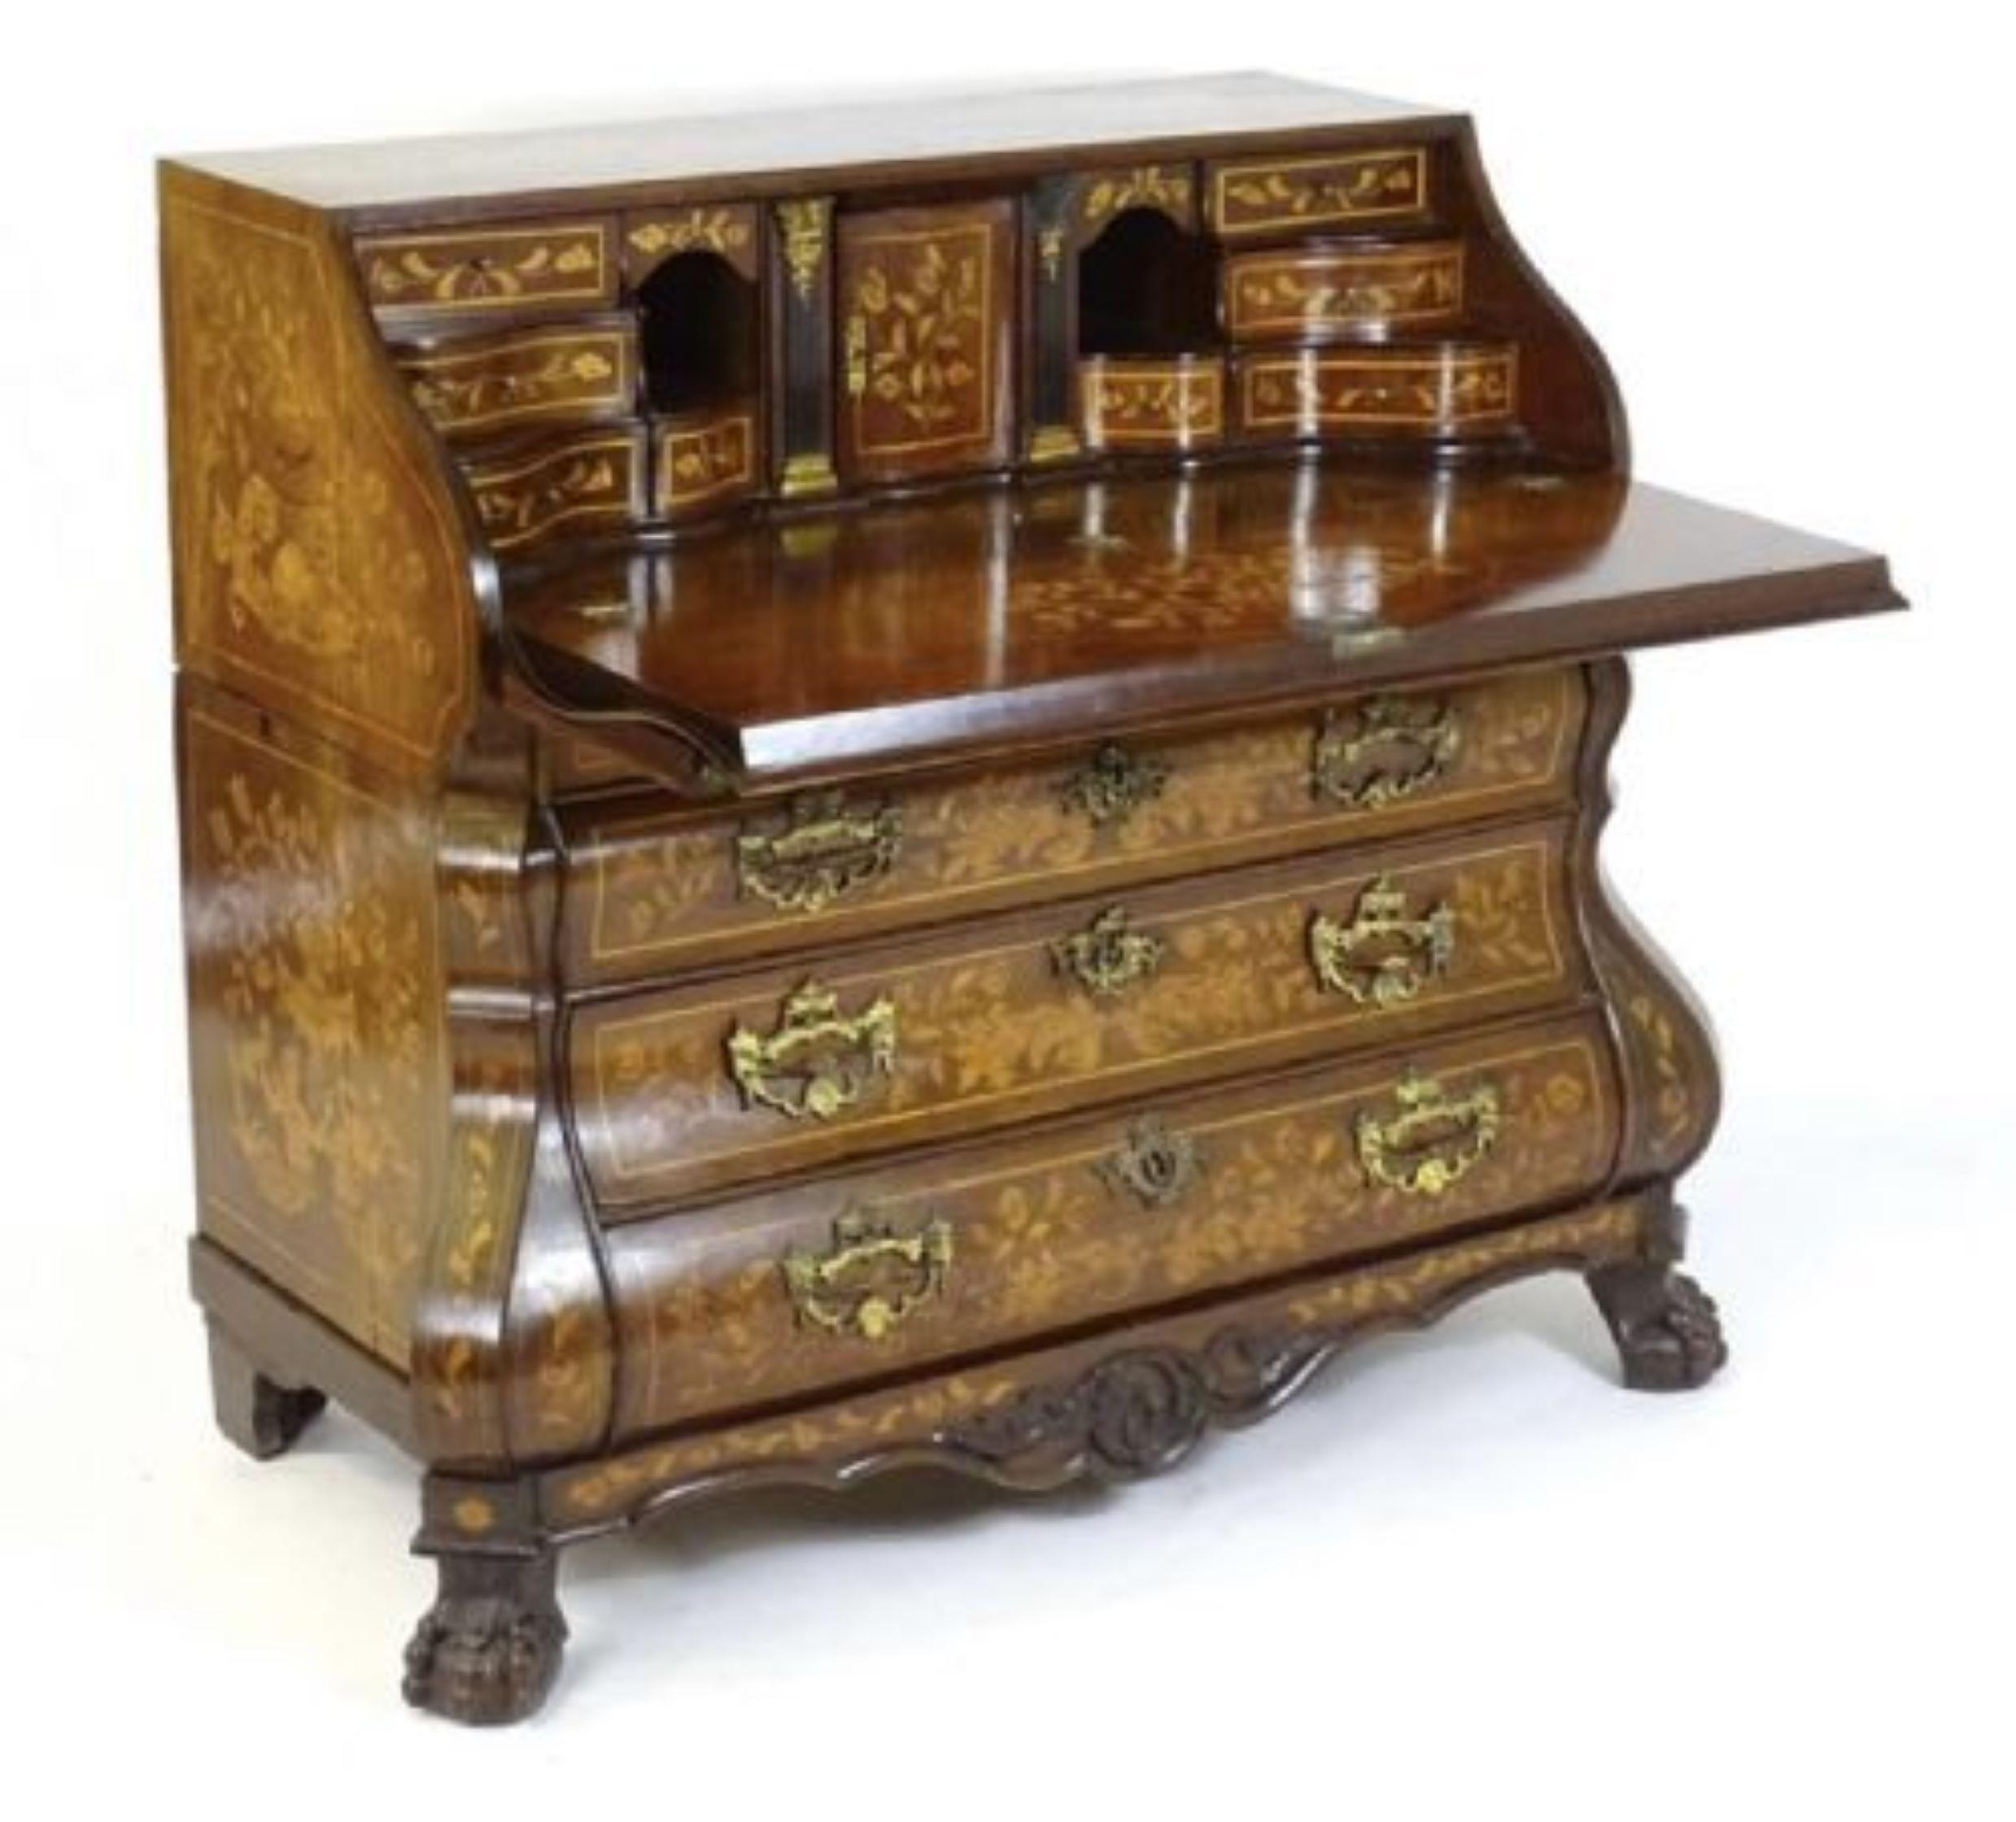 Antique 18th century quality Dutch burr walnut floral marquetry bureau In Good Condition For Sale In Ipswich, GB